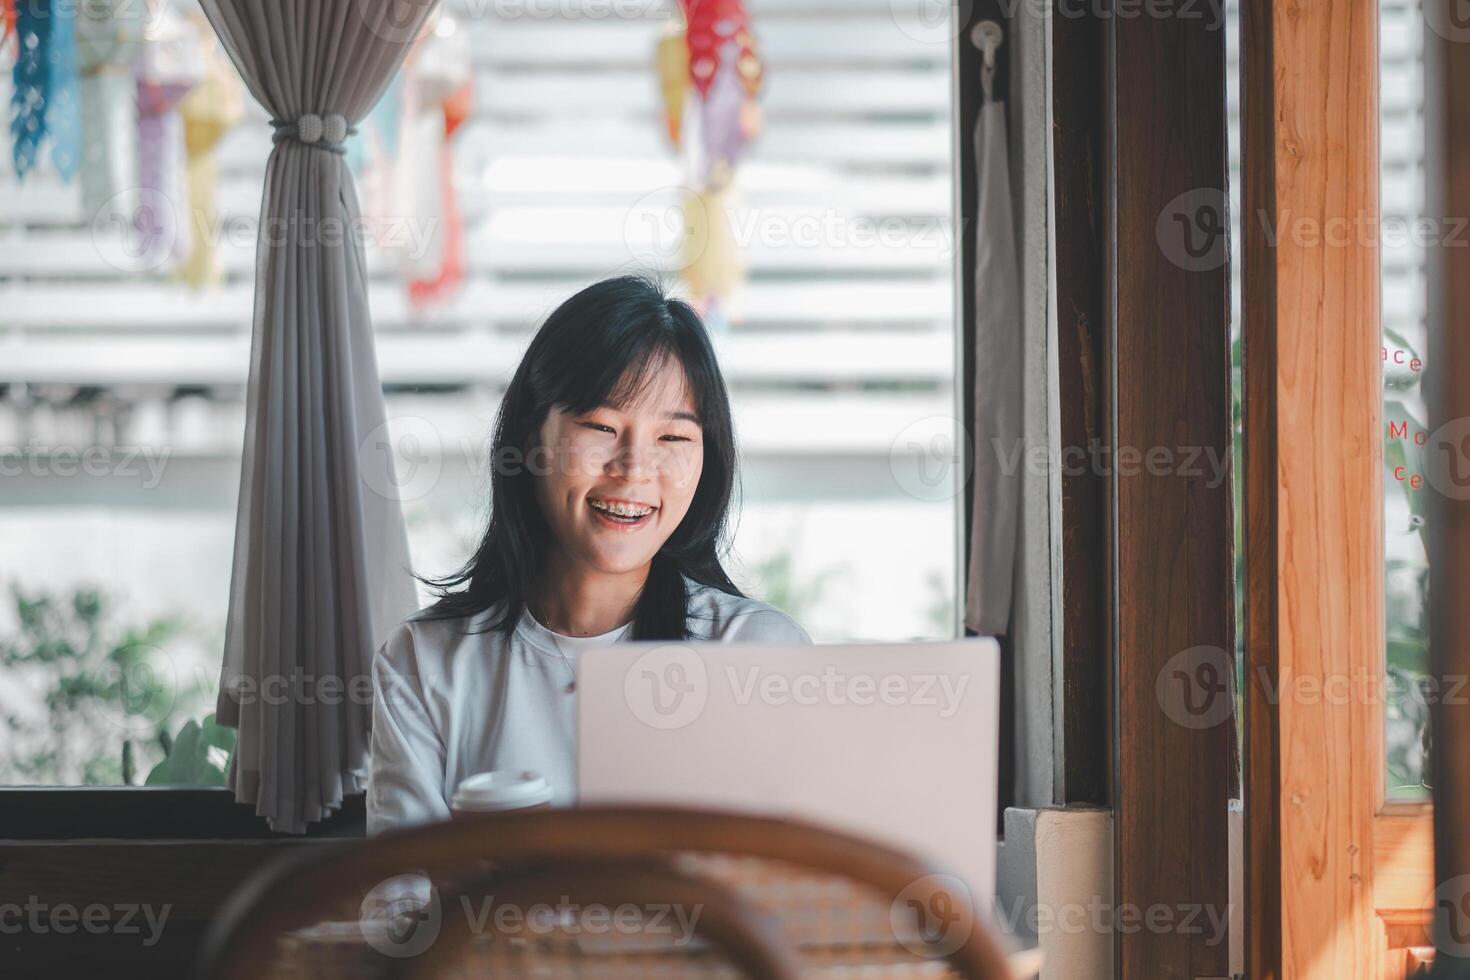 Business freelance concept, A joyful woman with braces smiles while working on her laptop in the warm ambiance of a sunny cafe interior. photo